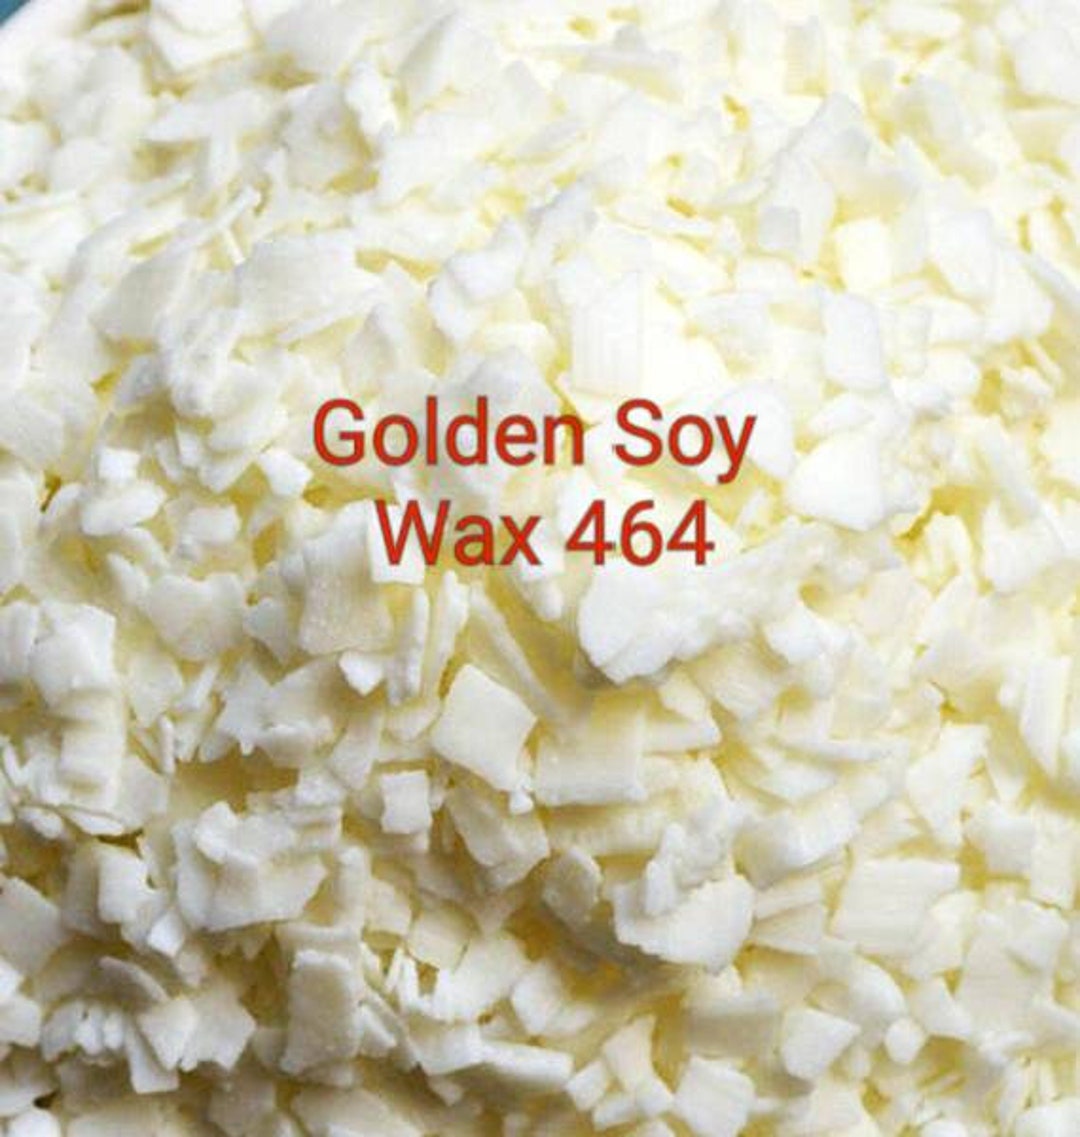 Golden Brands SOY WAX FLAKES 464 - 100% Pure, Organic